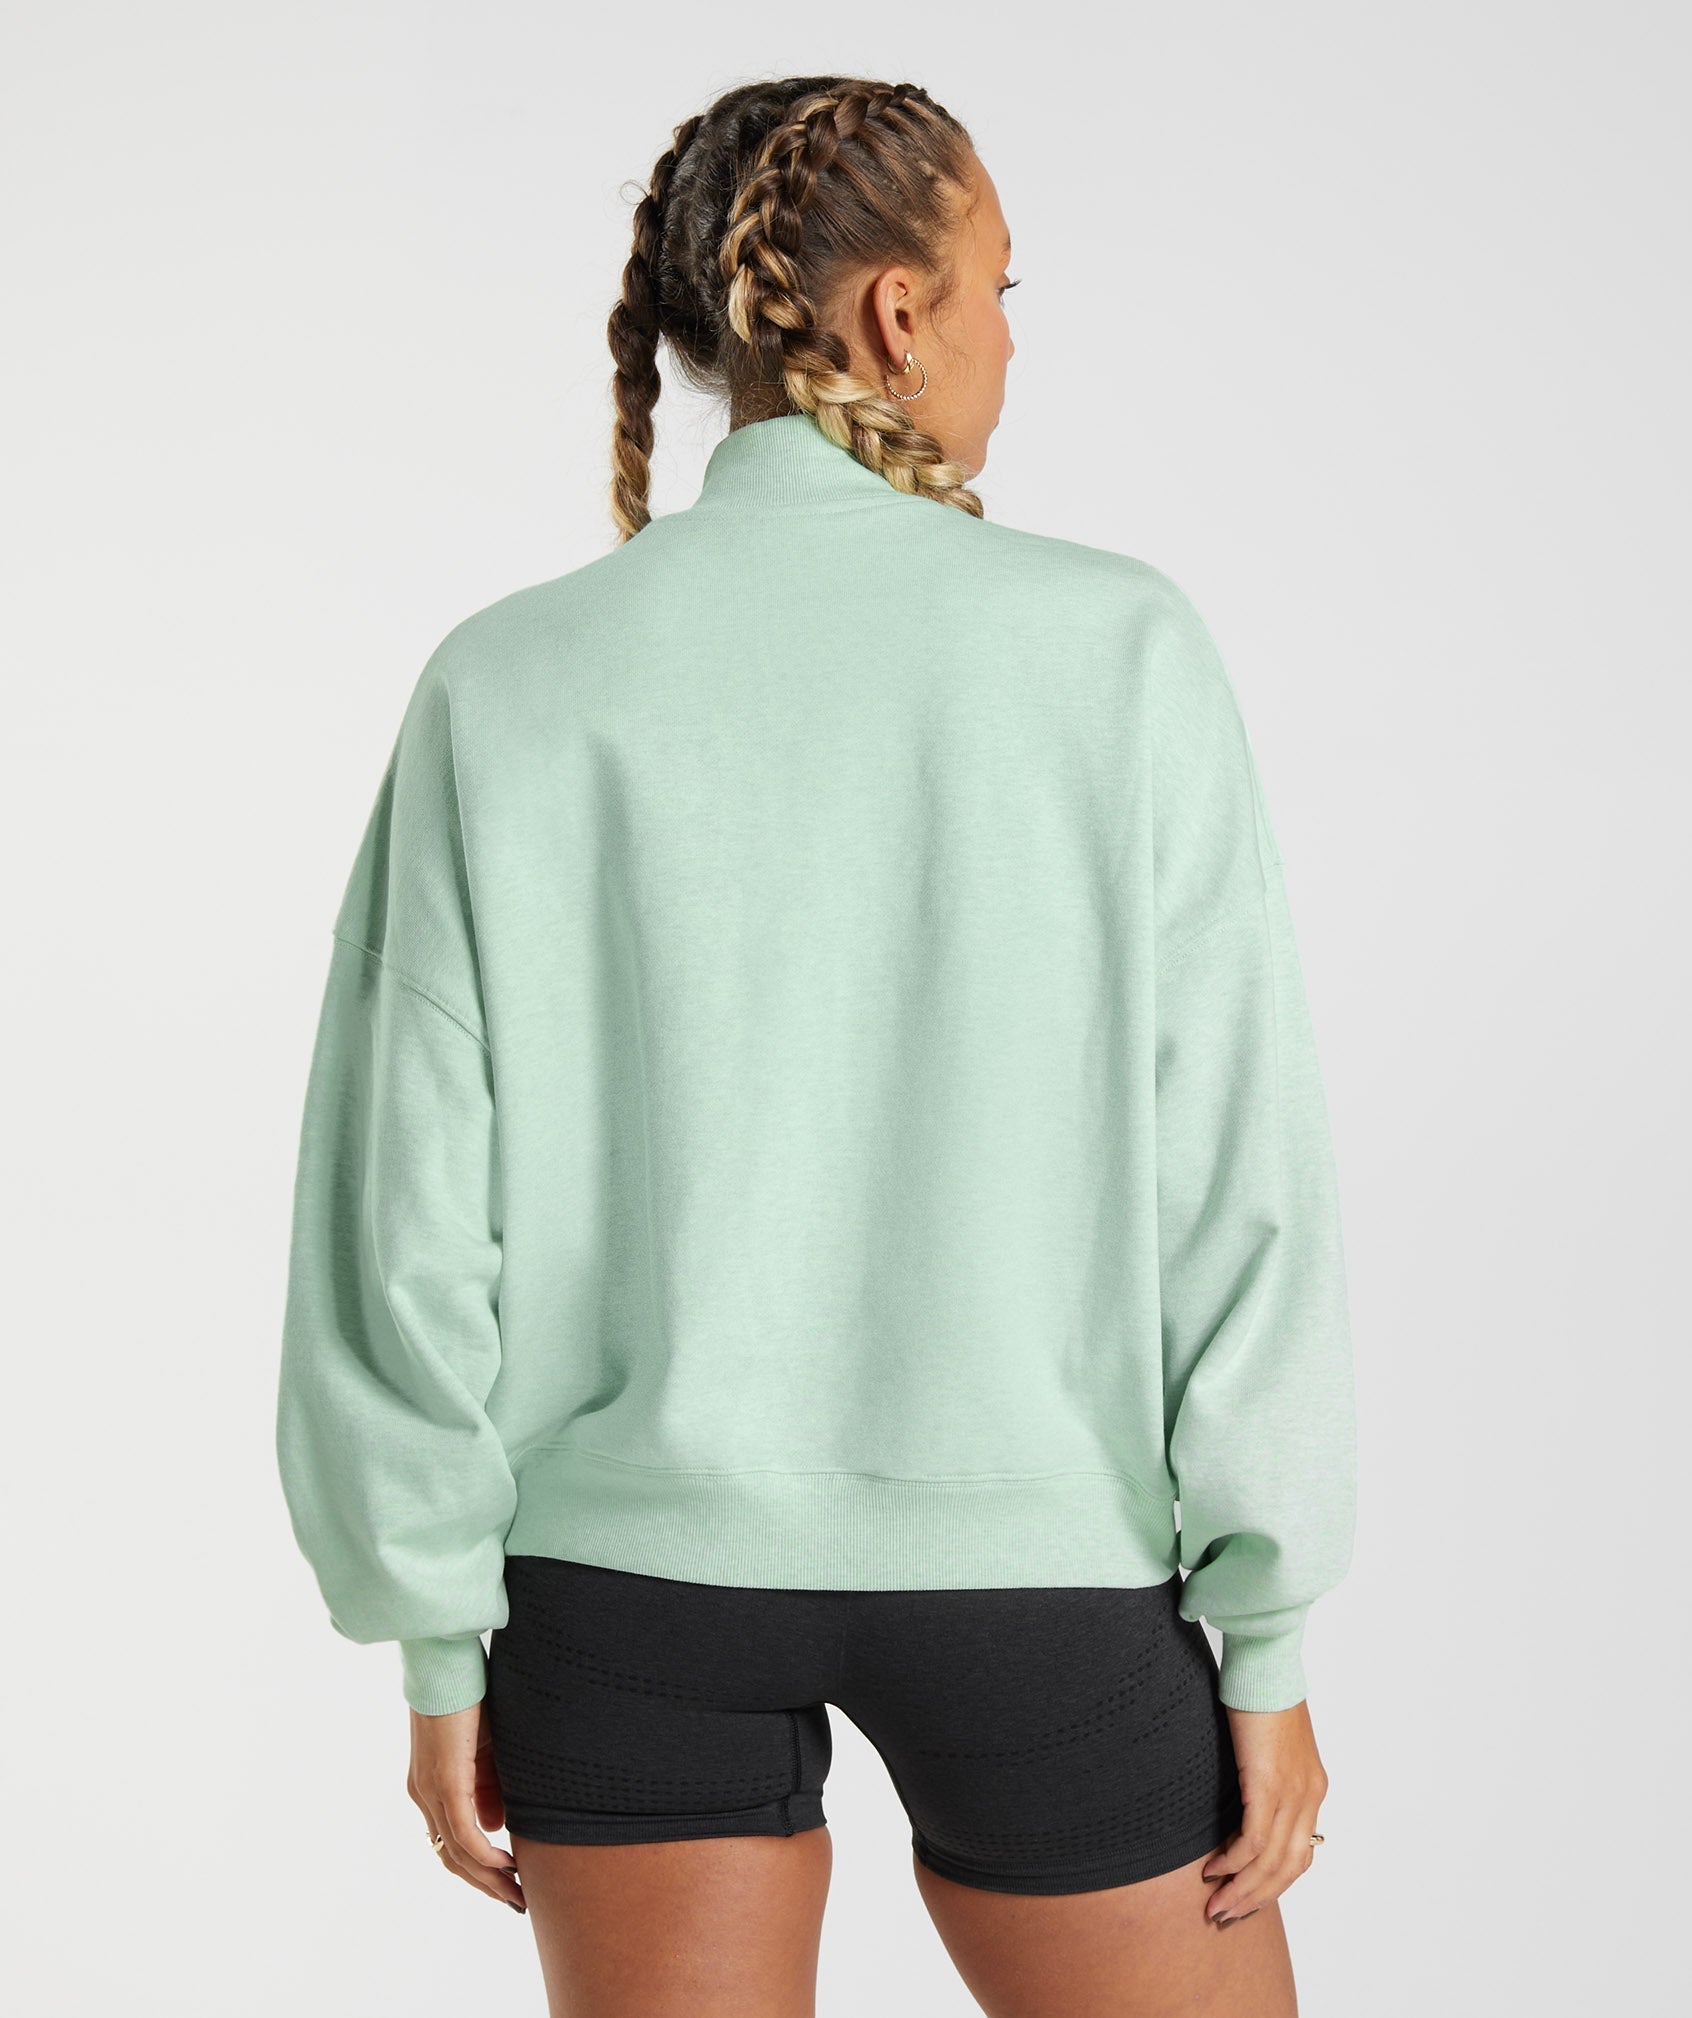 Rest Day Sweats 1/2 Zip Pullover in Refreshing Green Marl - view 3